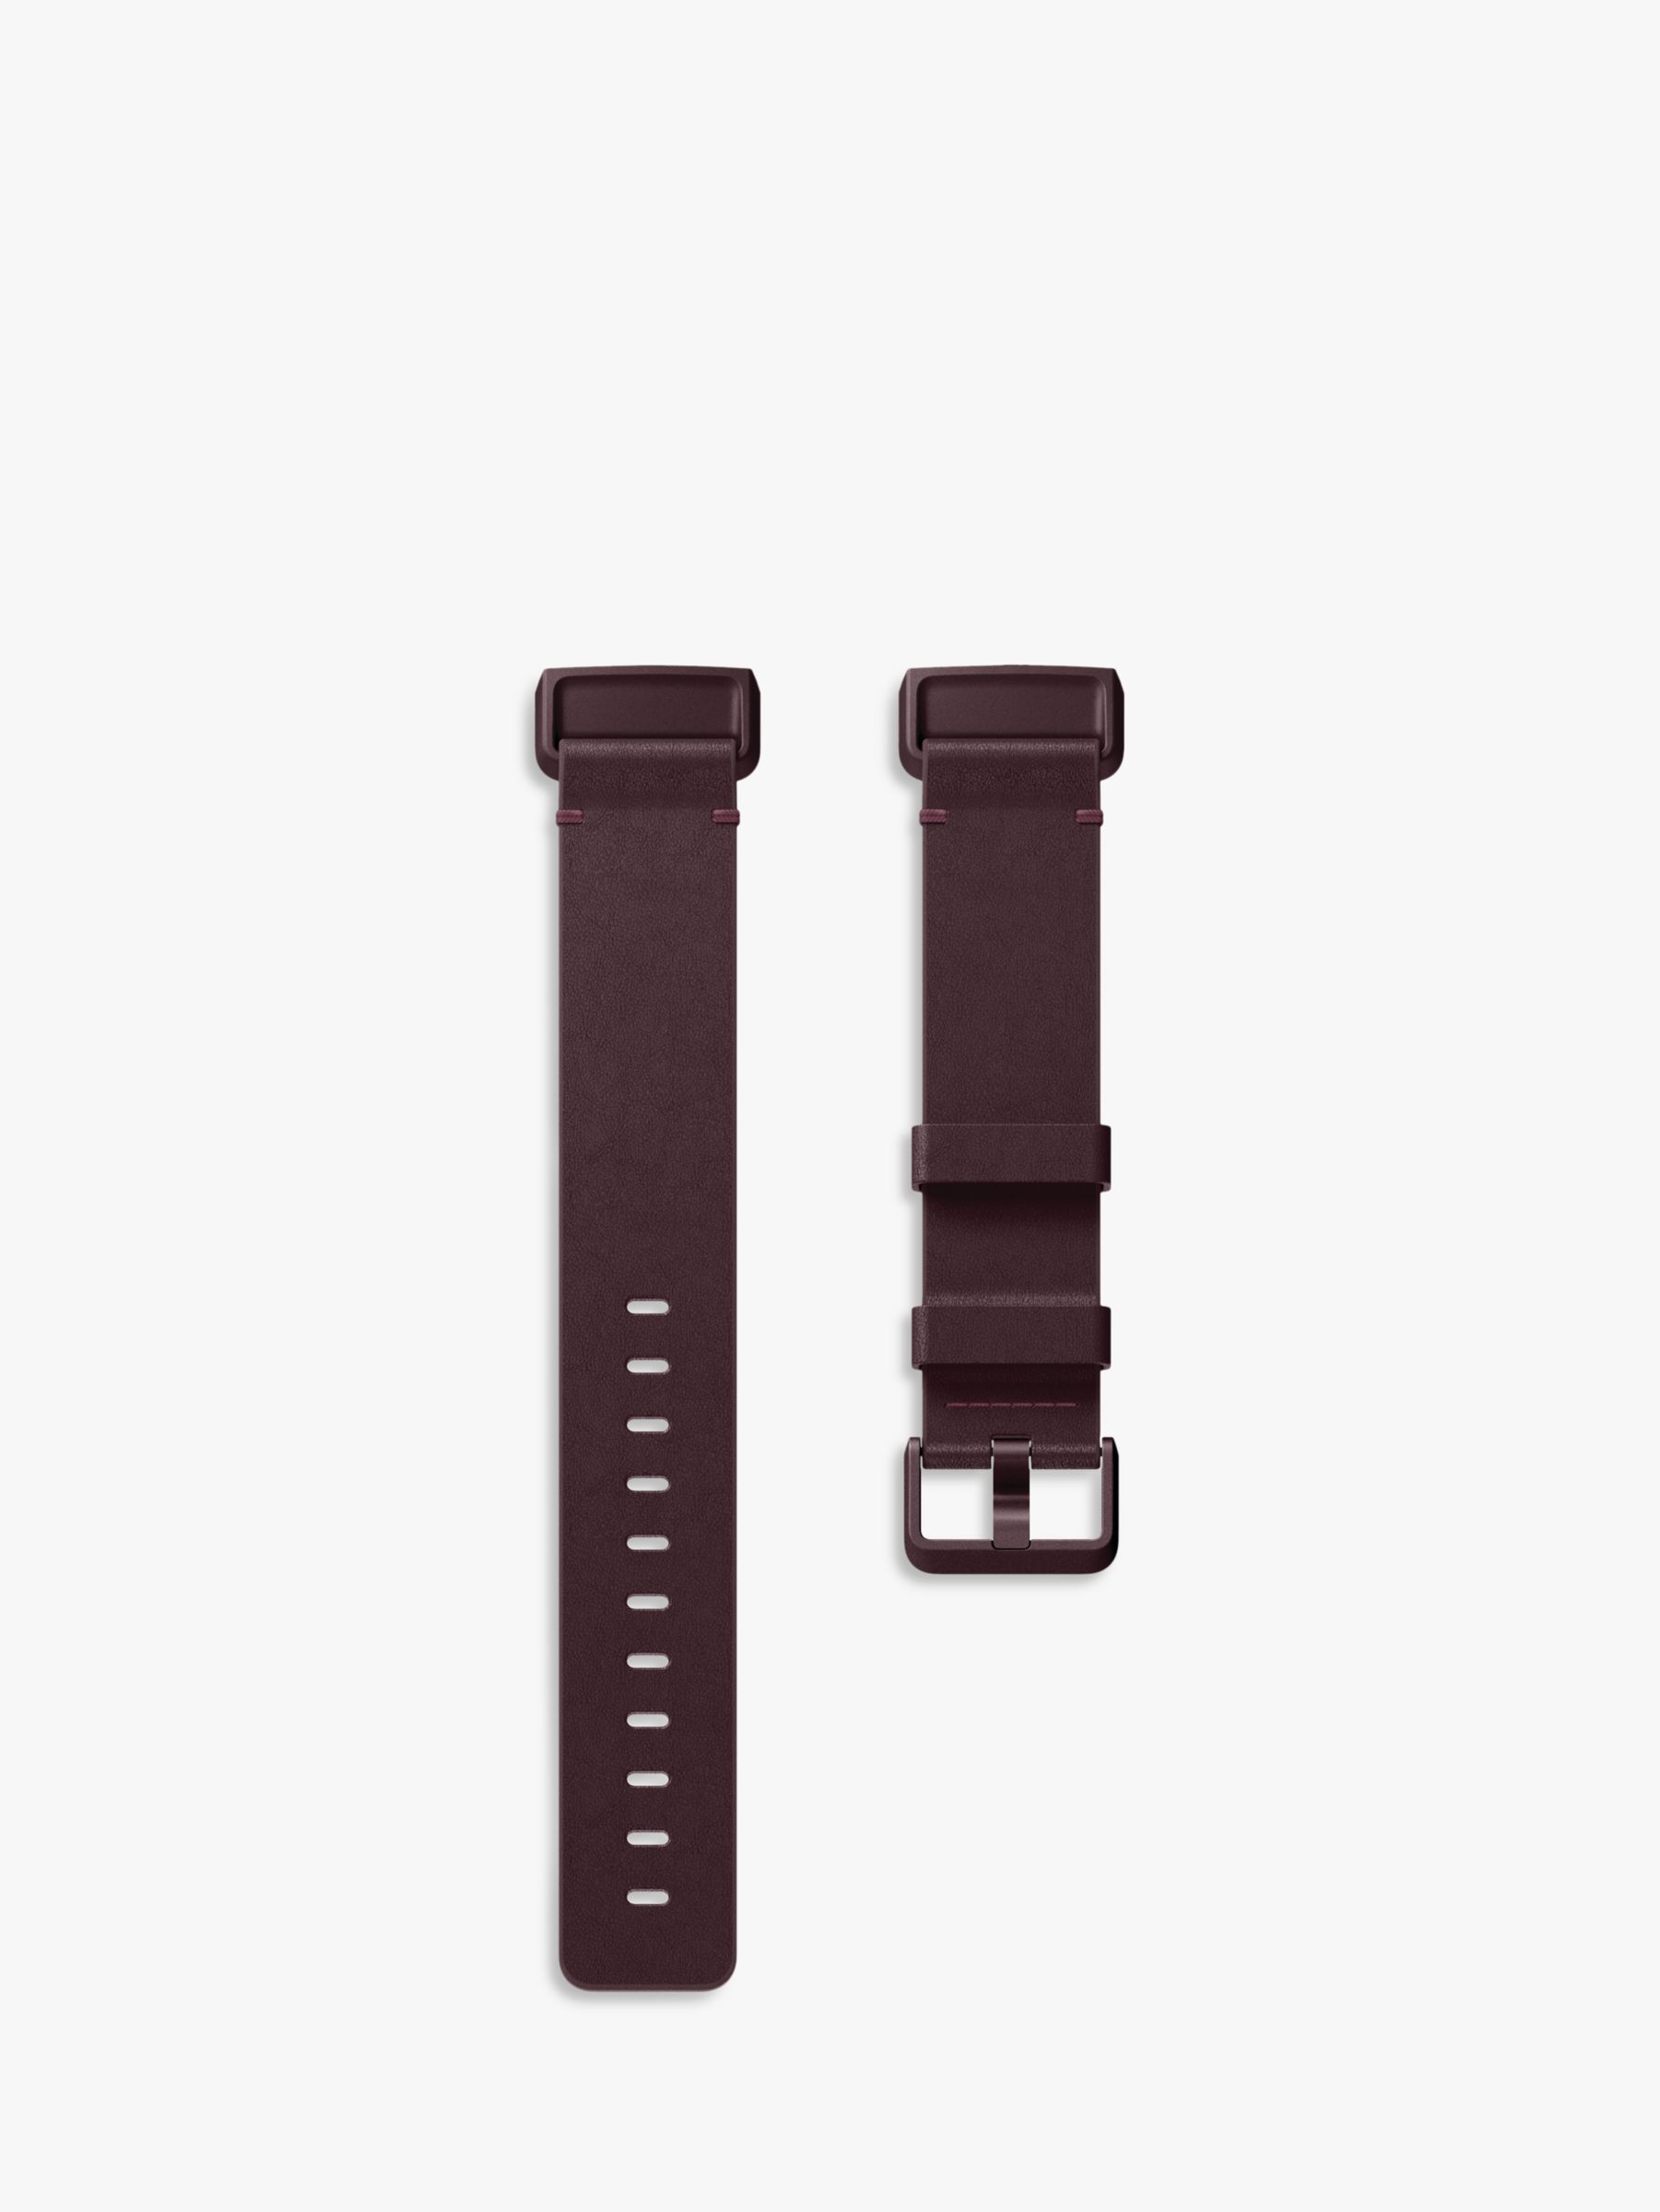 fitbit charge 3 rose gold john lewis